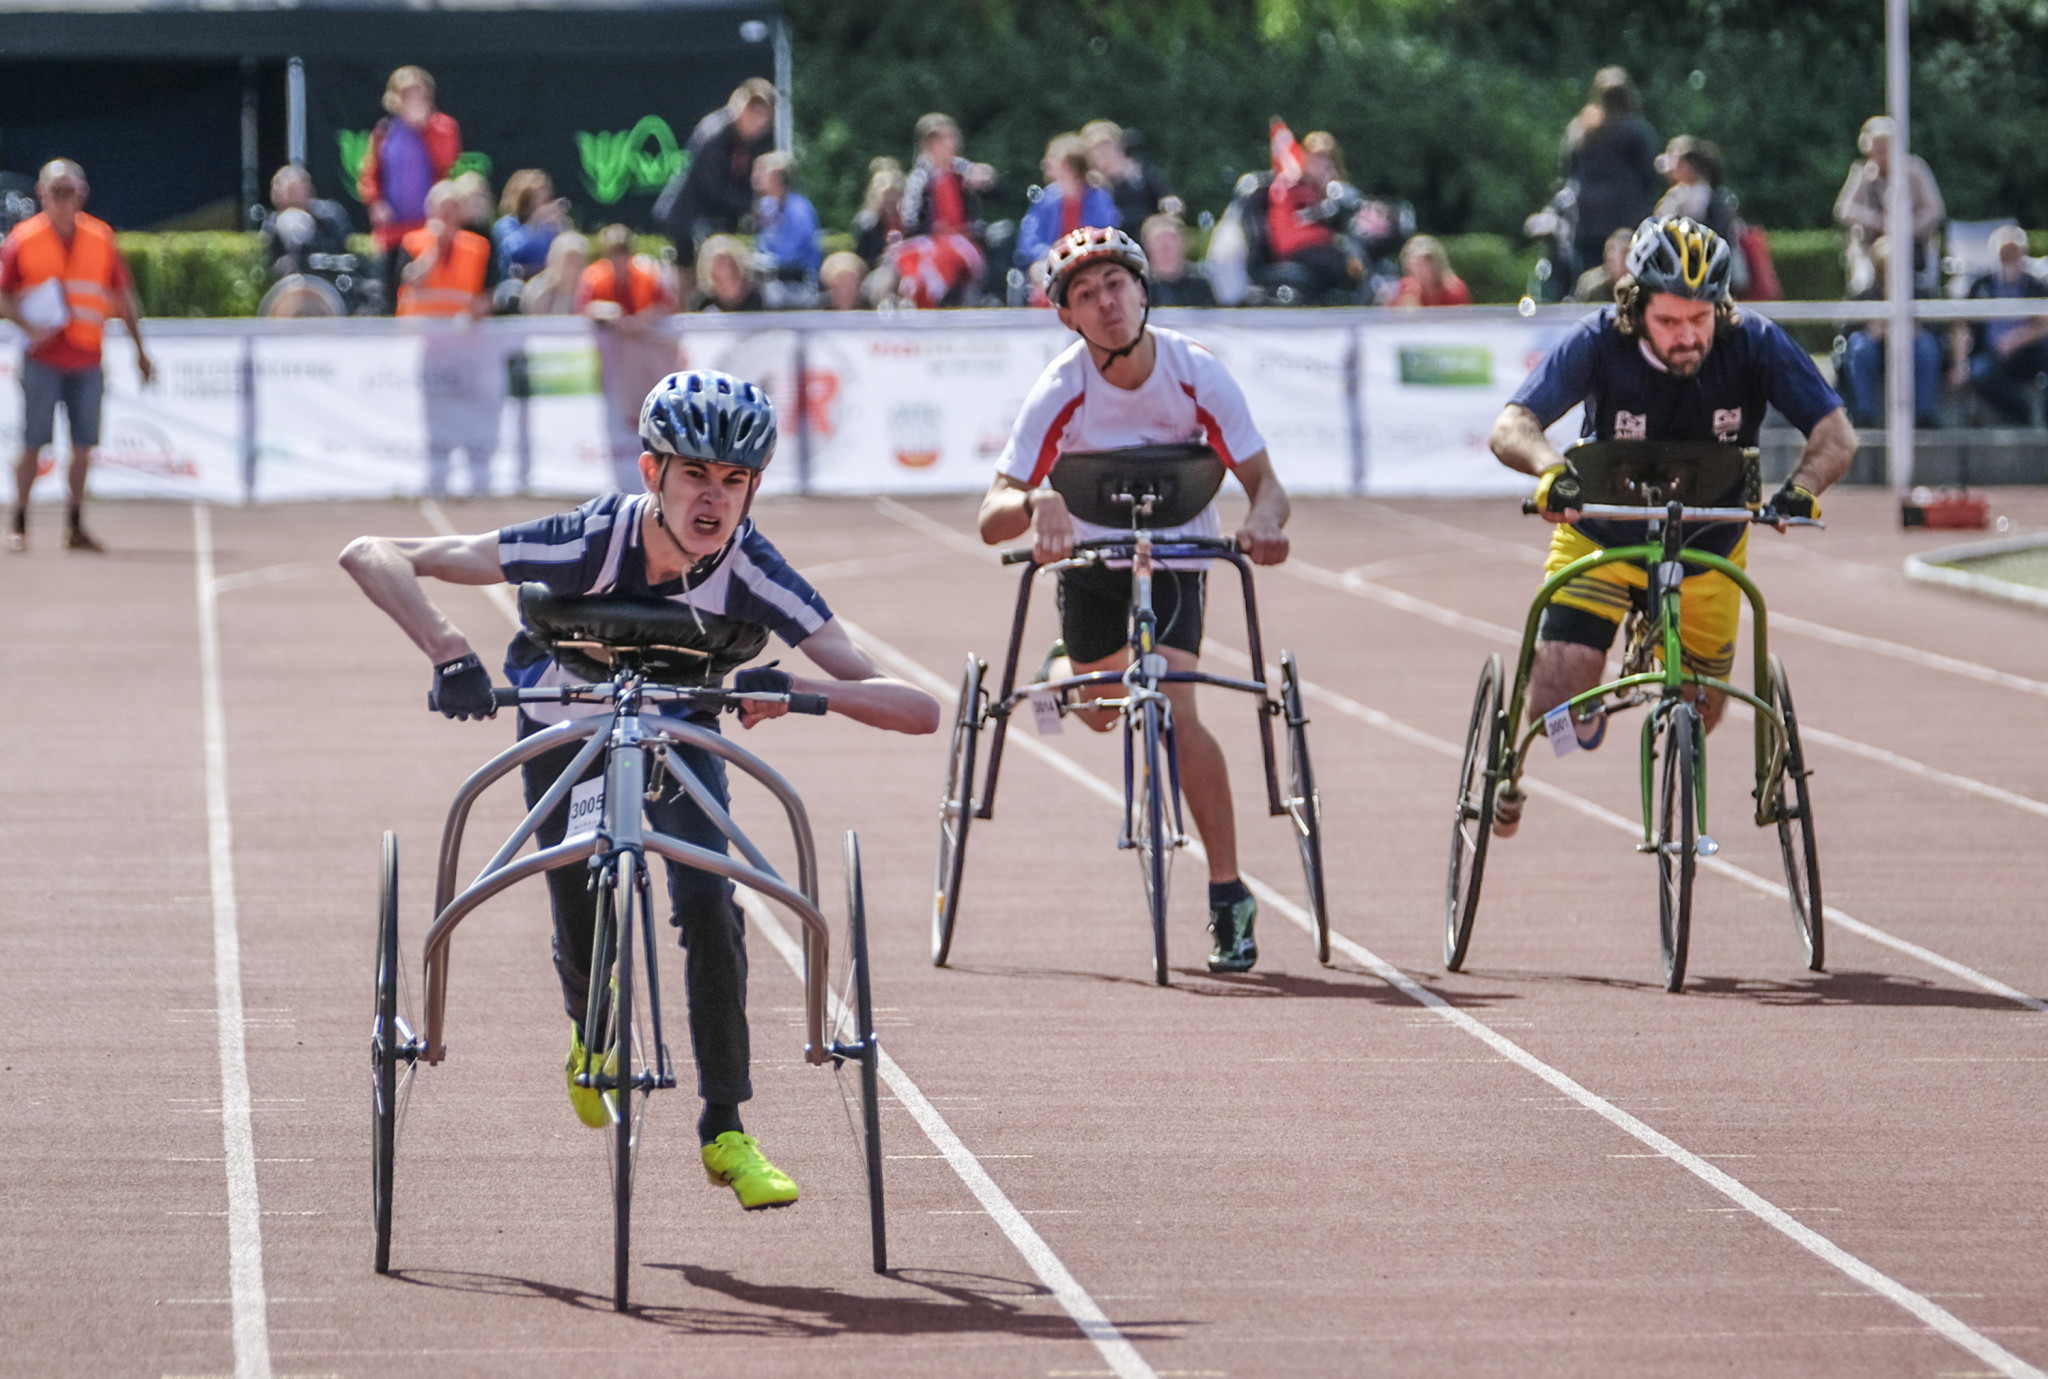 RaceRunning, where participants with high support needs compete with three-wheeled frames, will be included at the Dubai 2019 World Para Athletics Championships ©CIPSRA